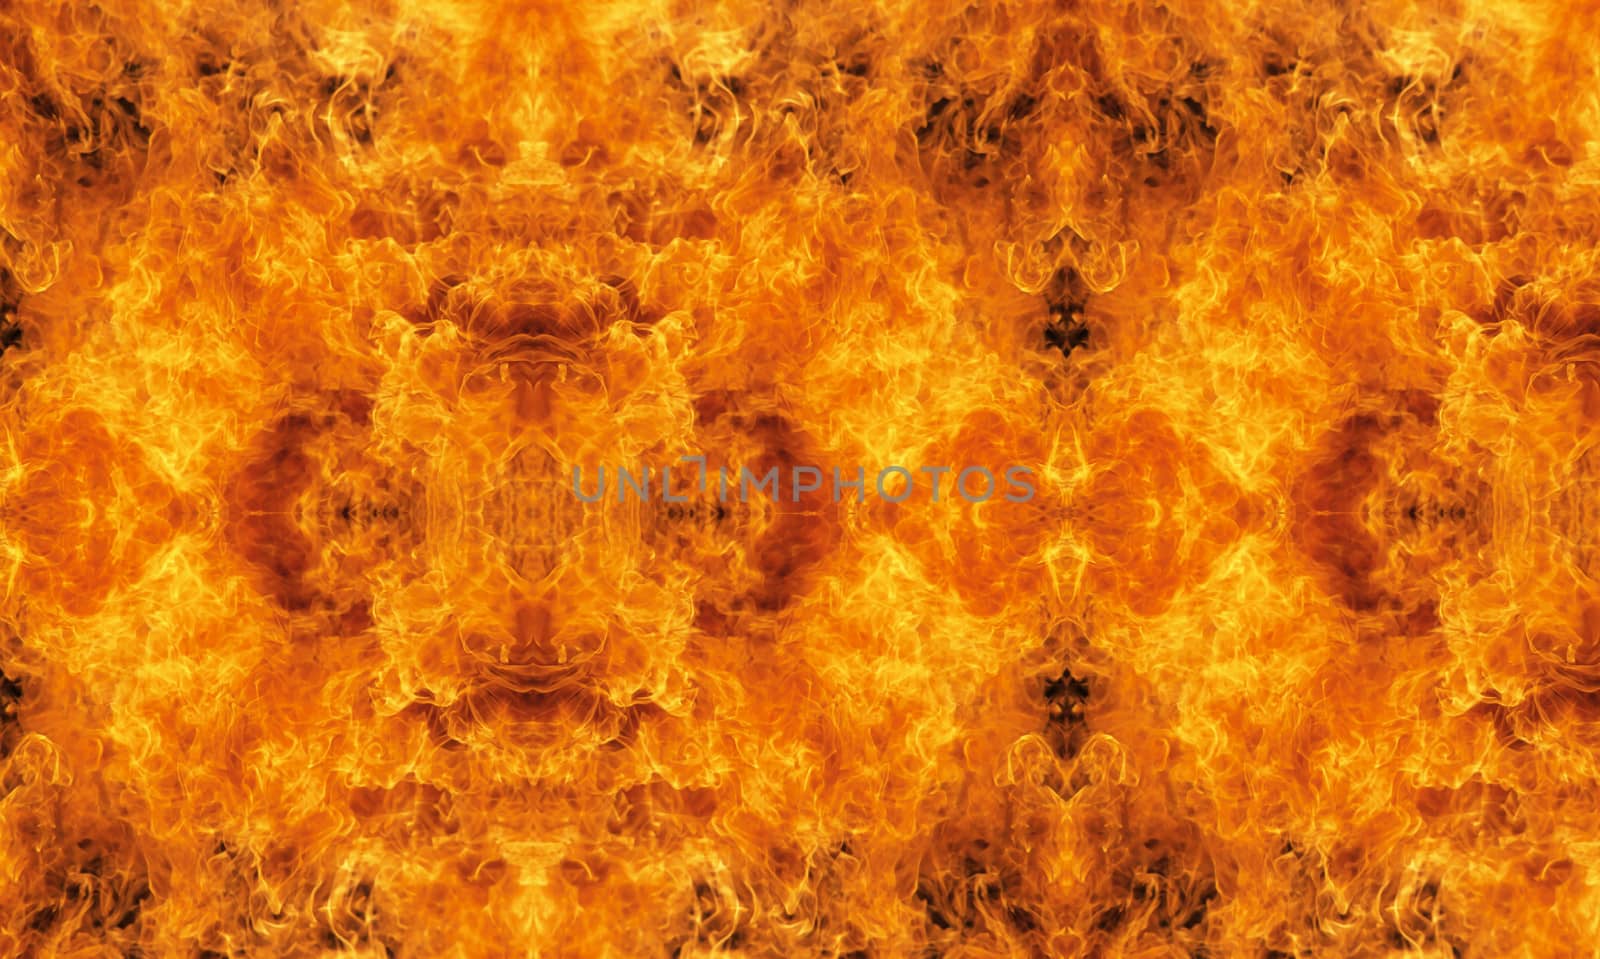 Burning fire close-up, may be used as background